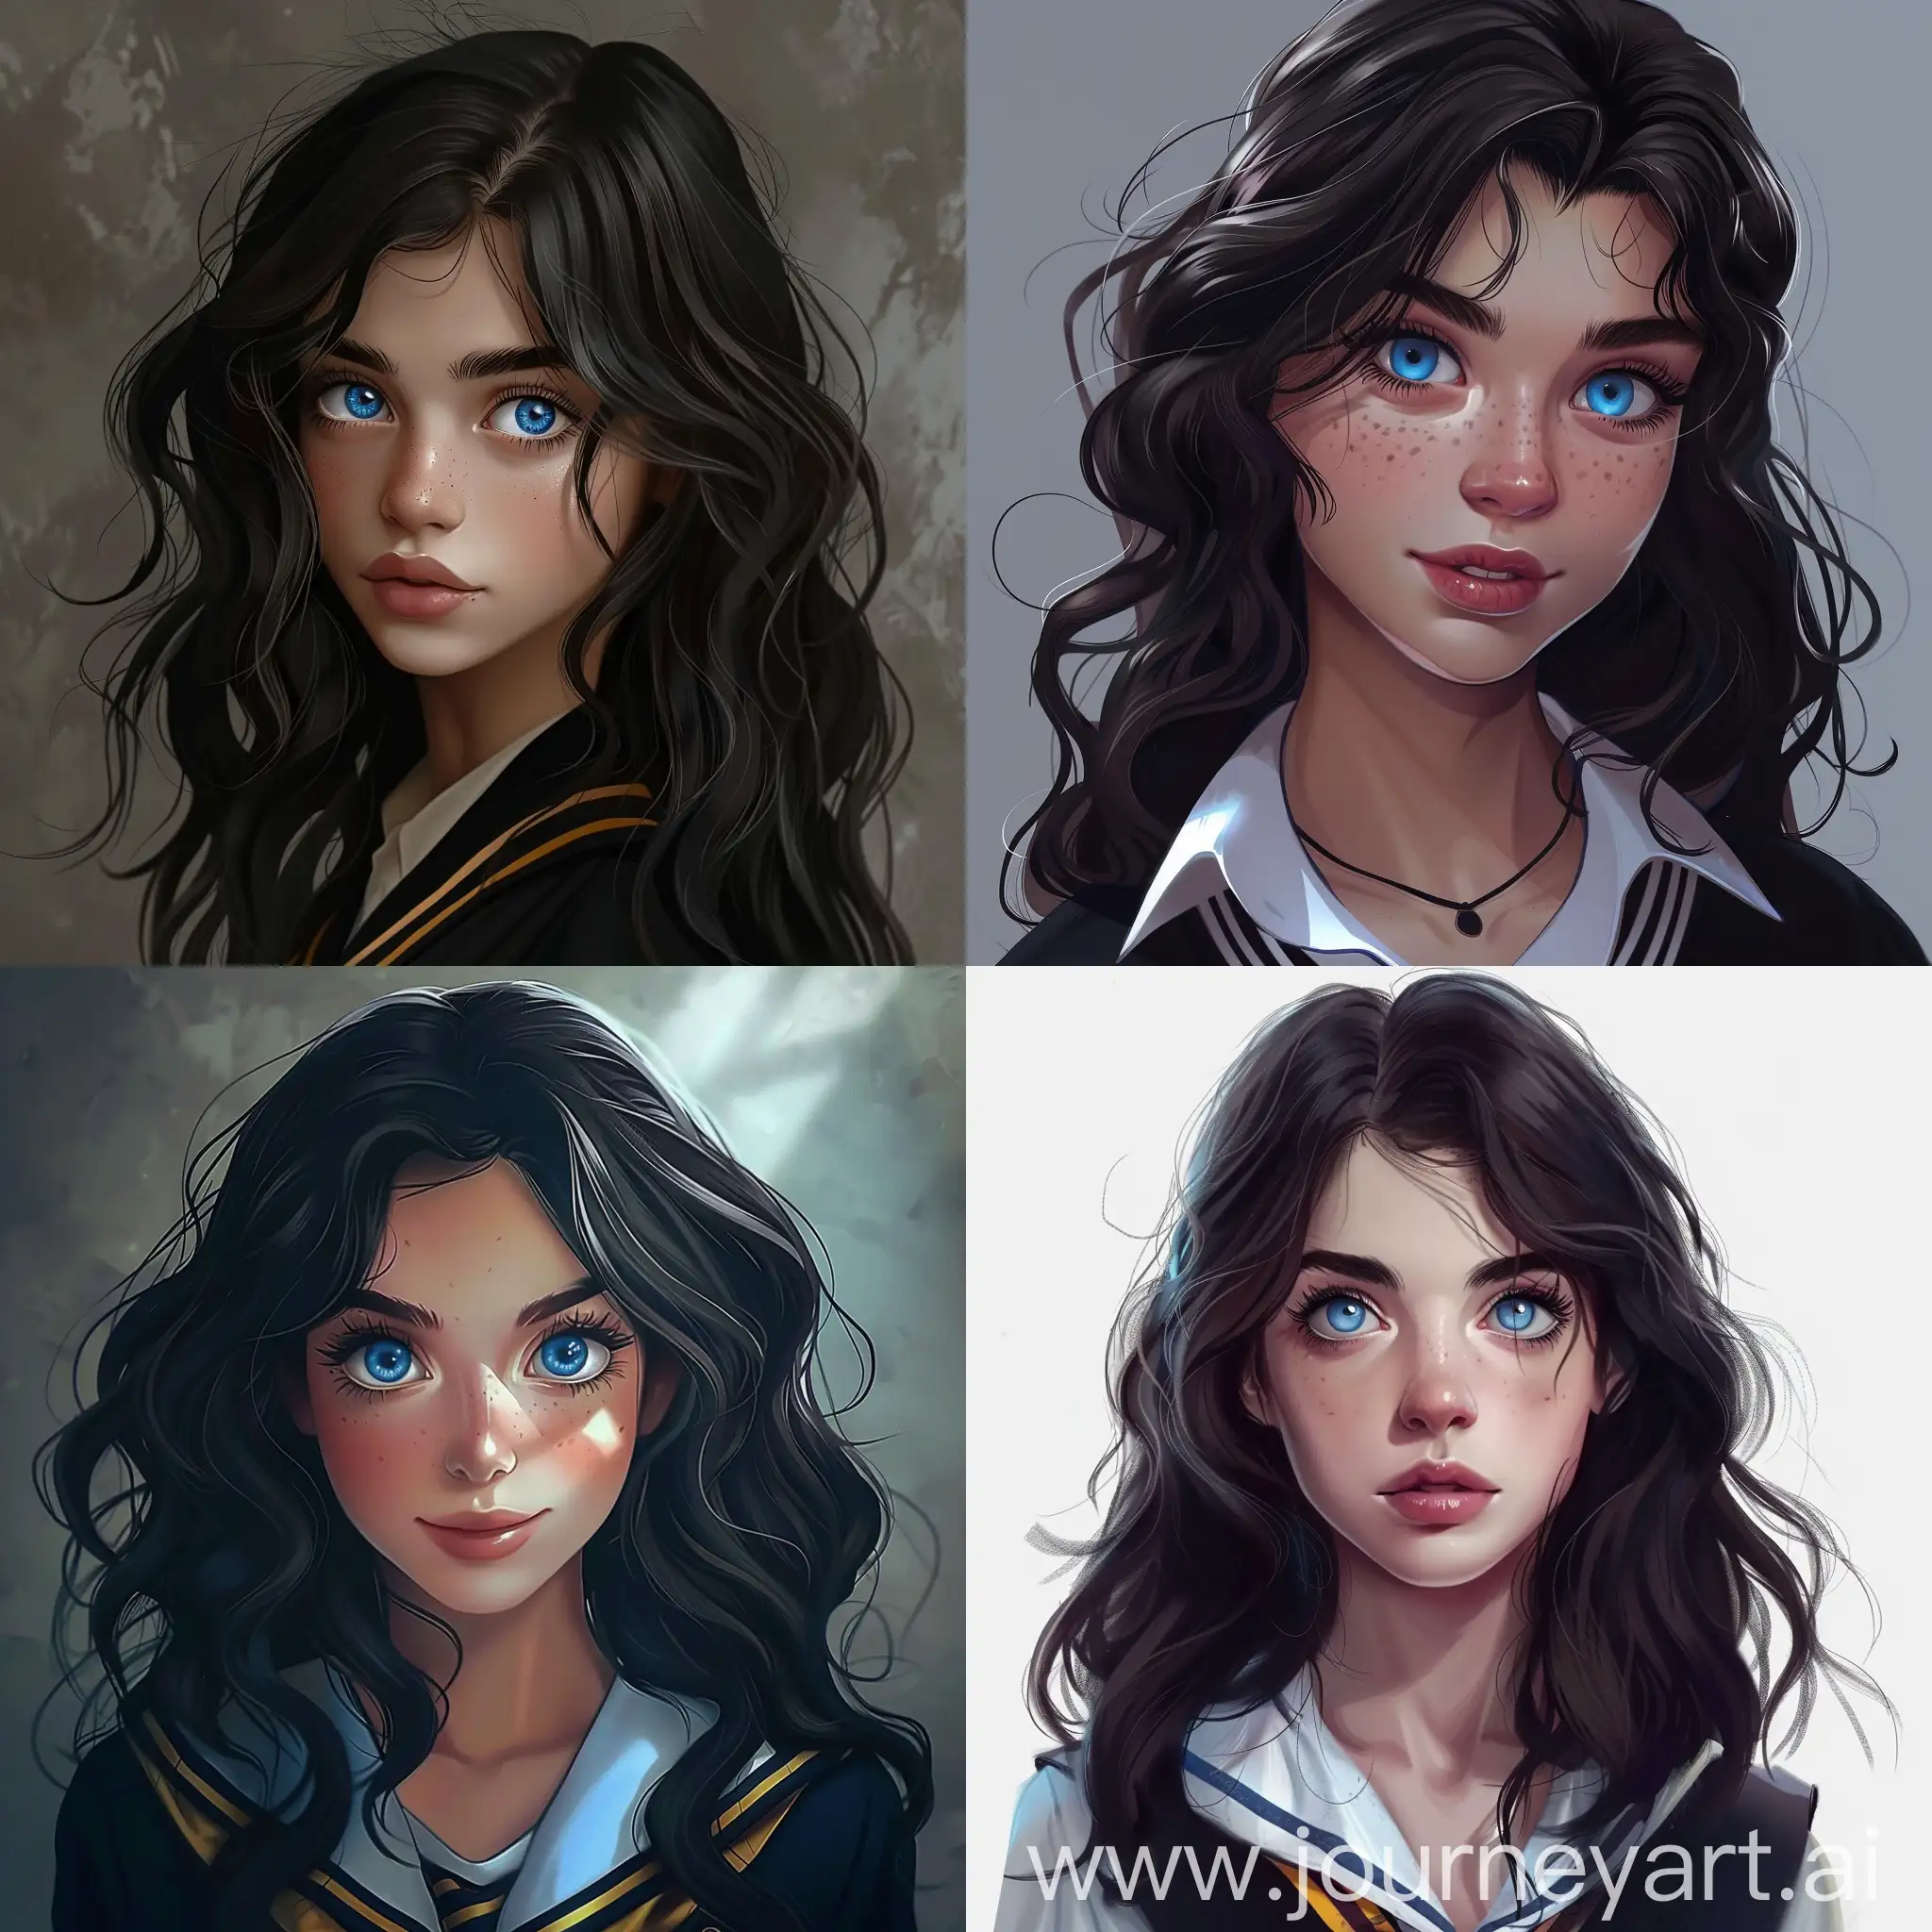 Ravenclaw-Teenage-Witch-Hogwarts-Student-with-Dark-Hair-and-Blue-Eyes